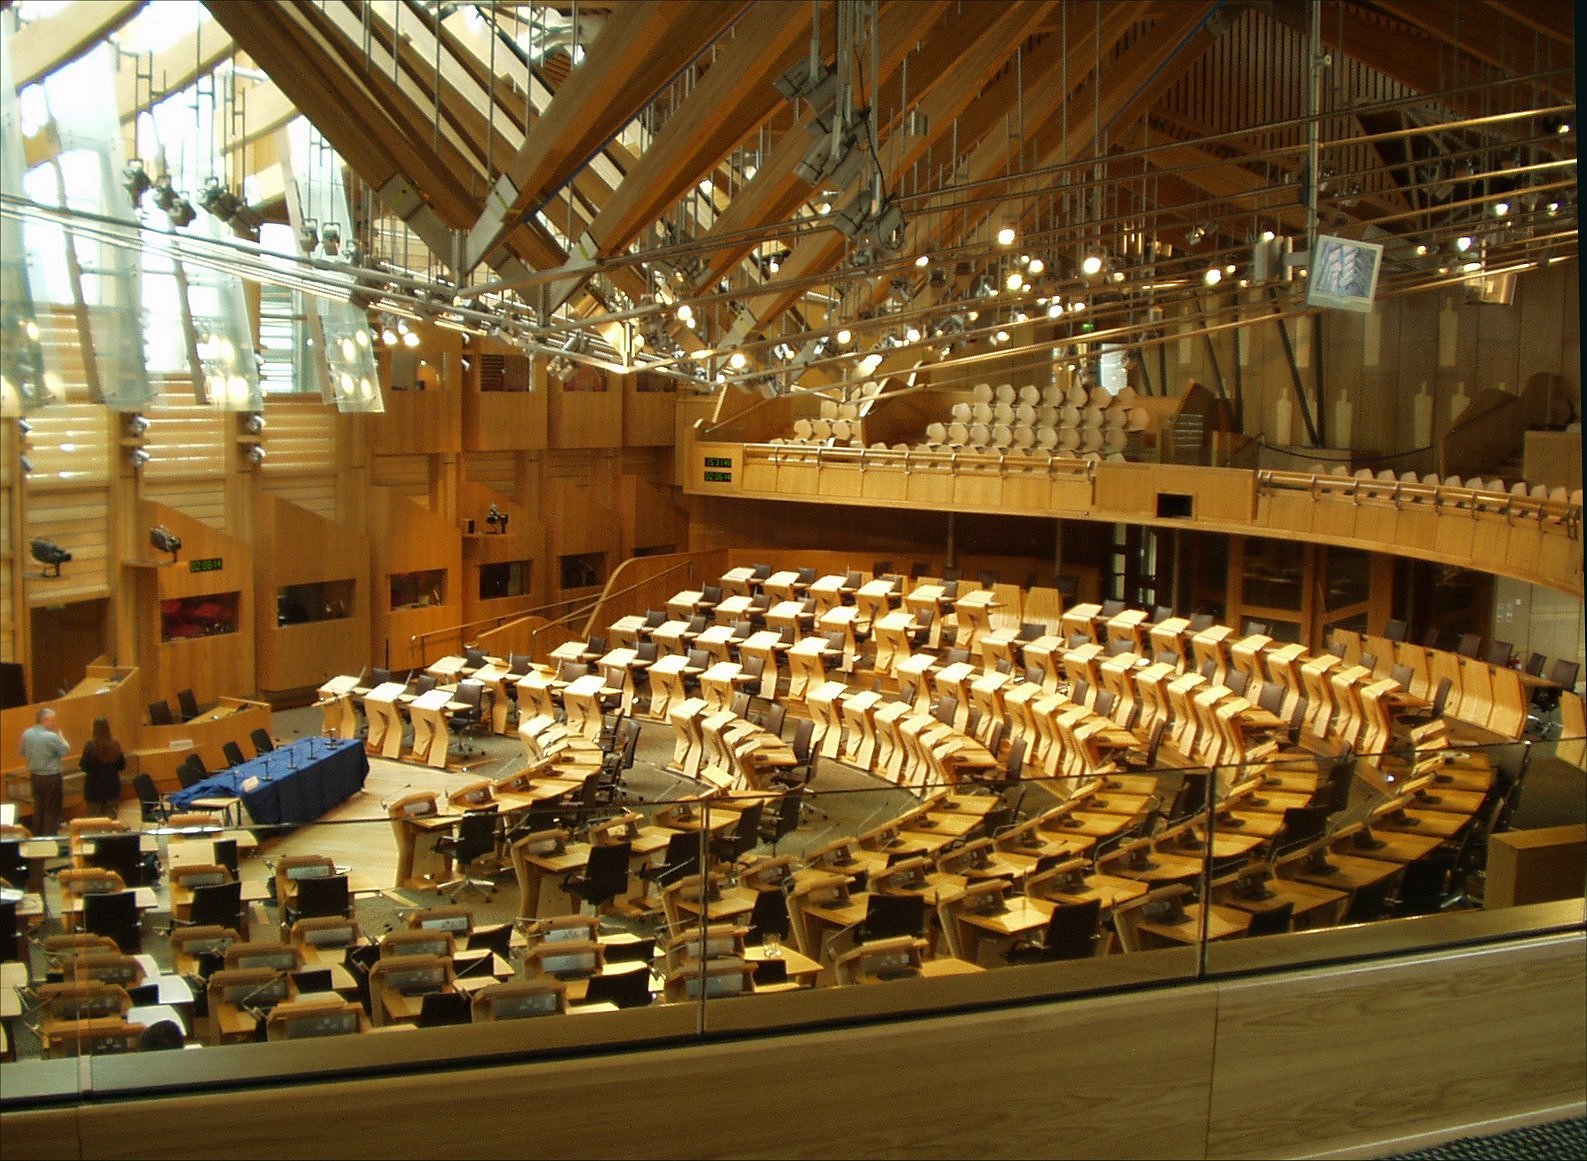 An image of the debating chamber in the Scottish Parliament.